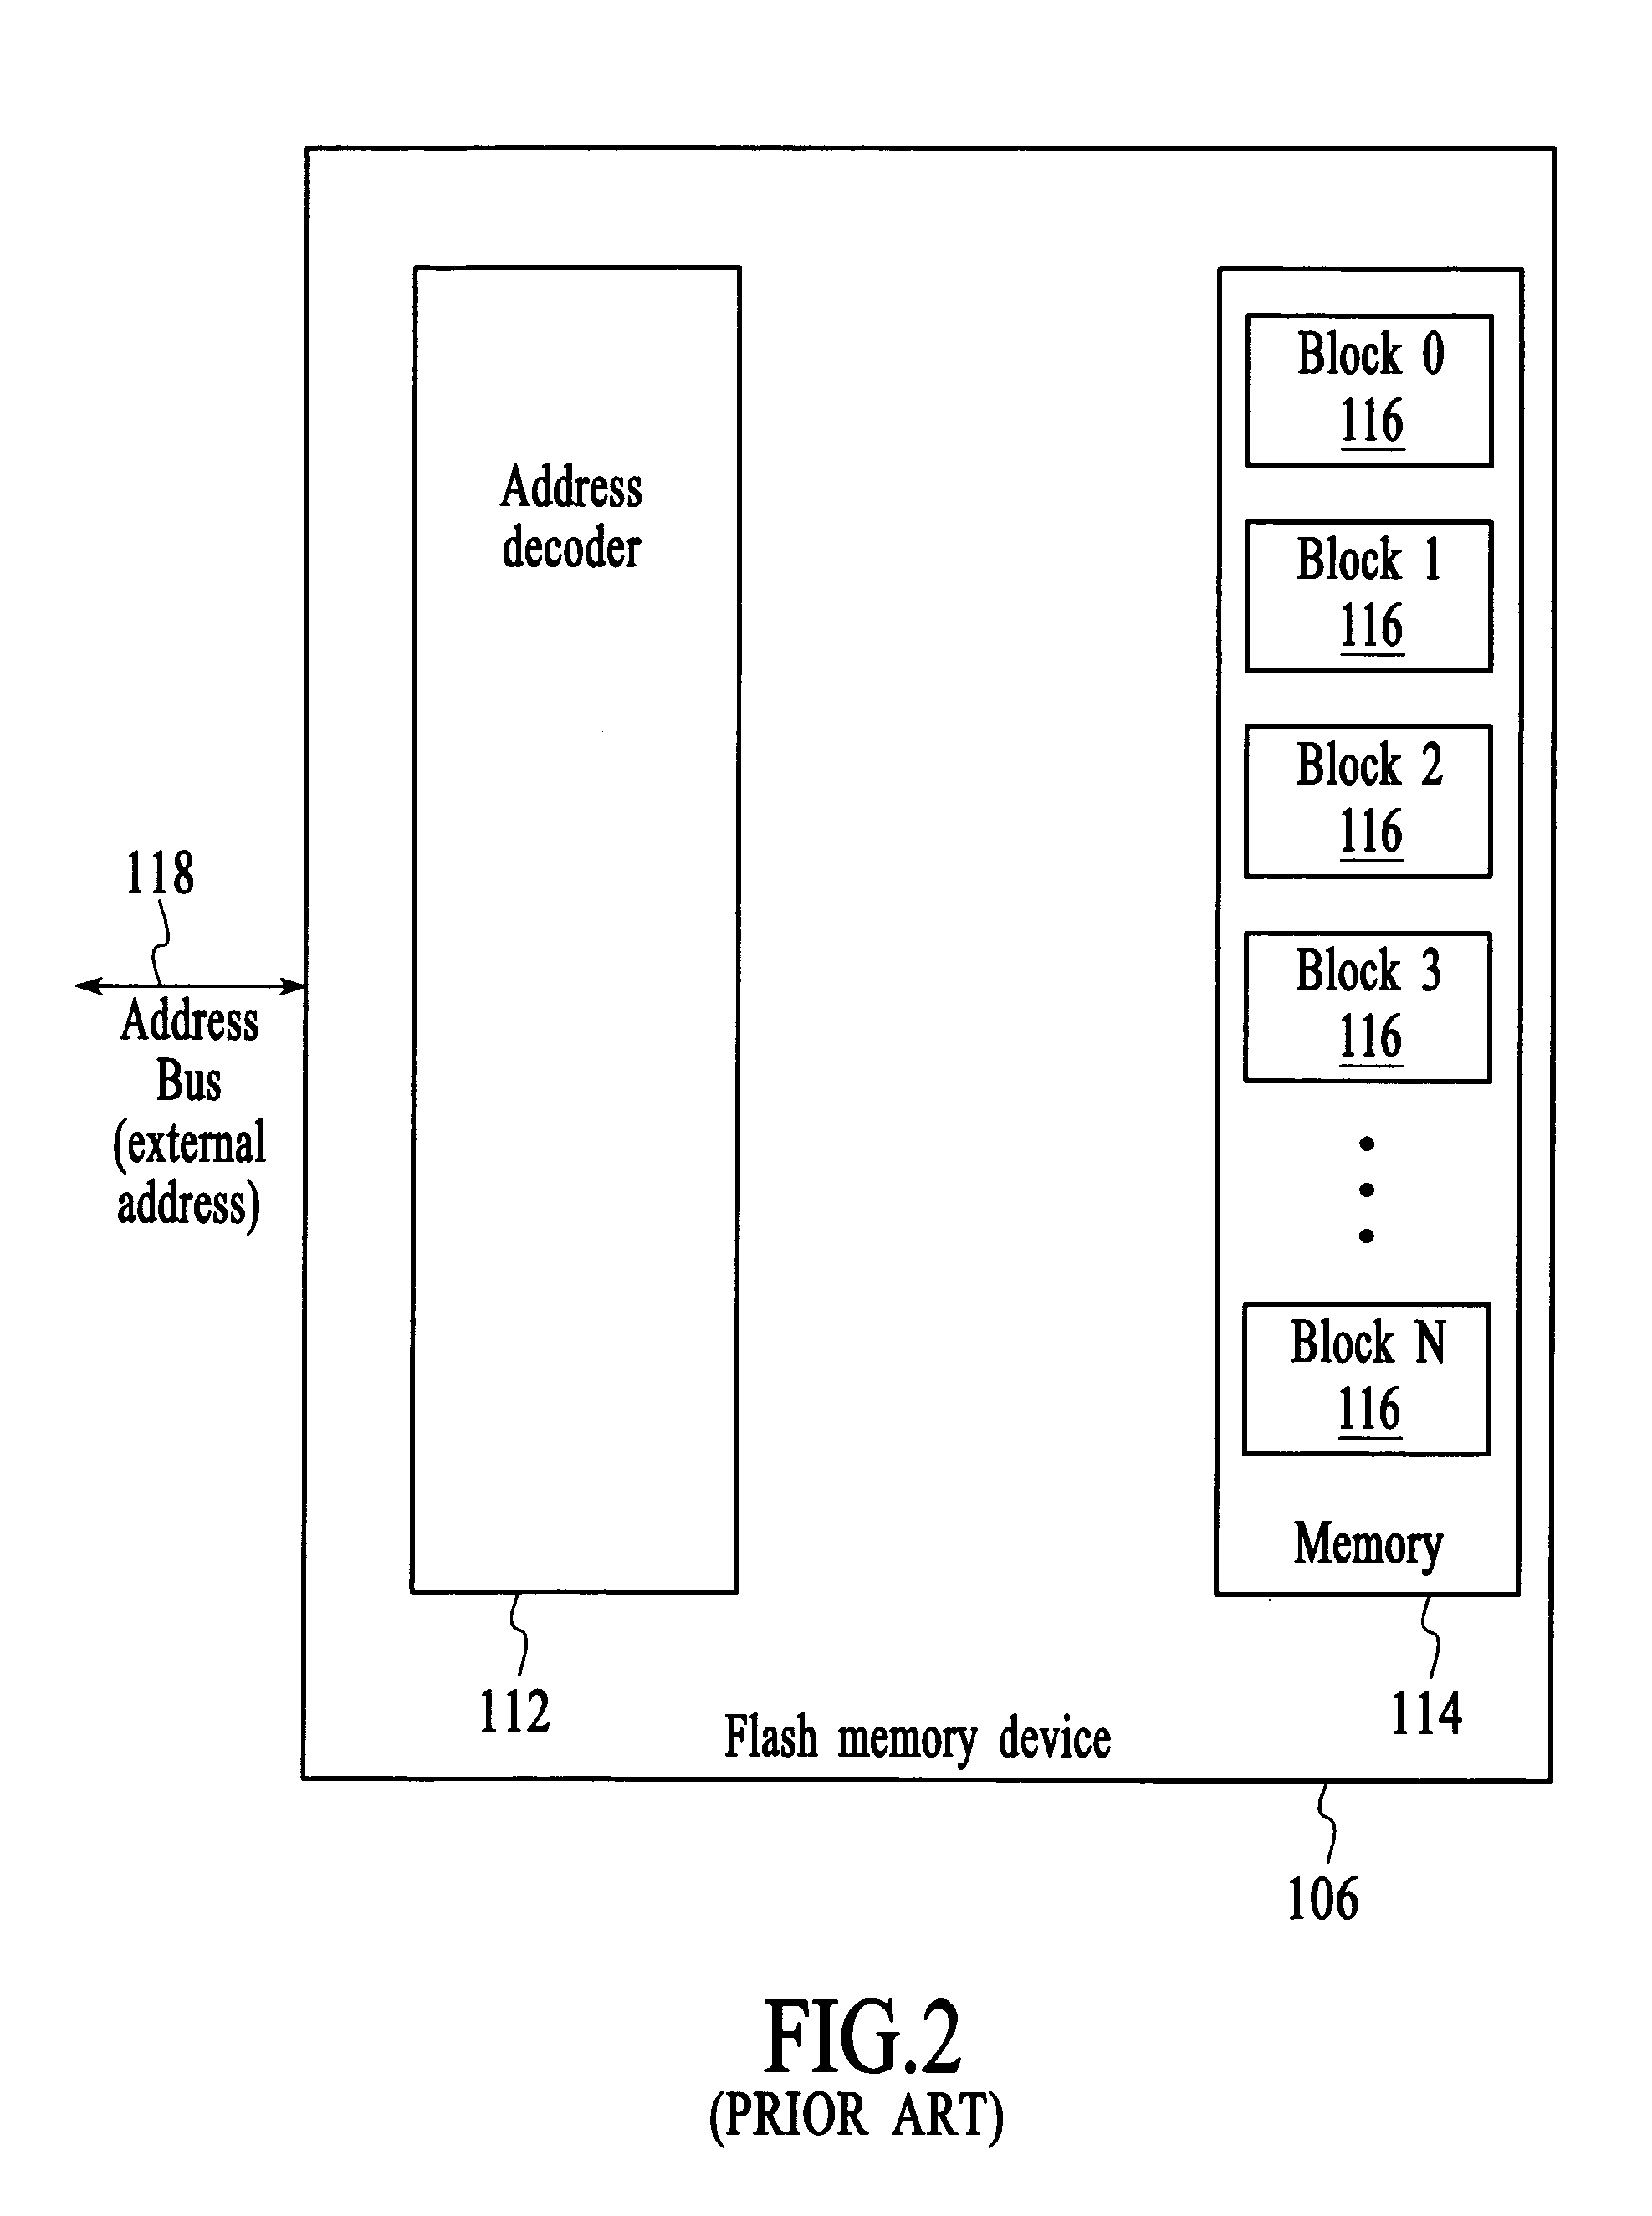 Device-level address translation within a programmable non-volatile memory device